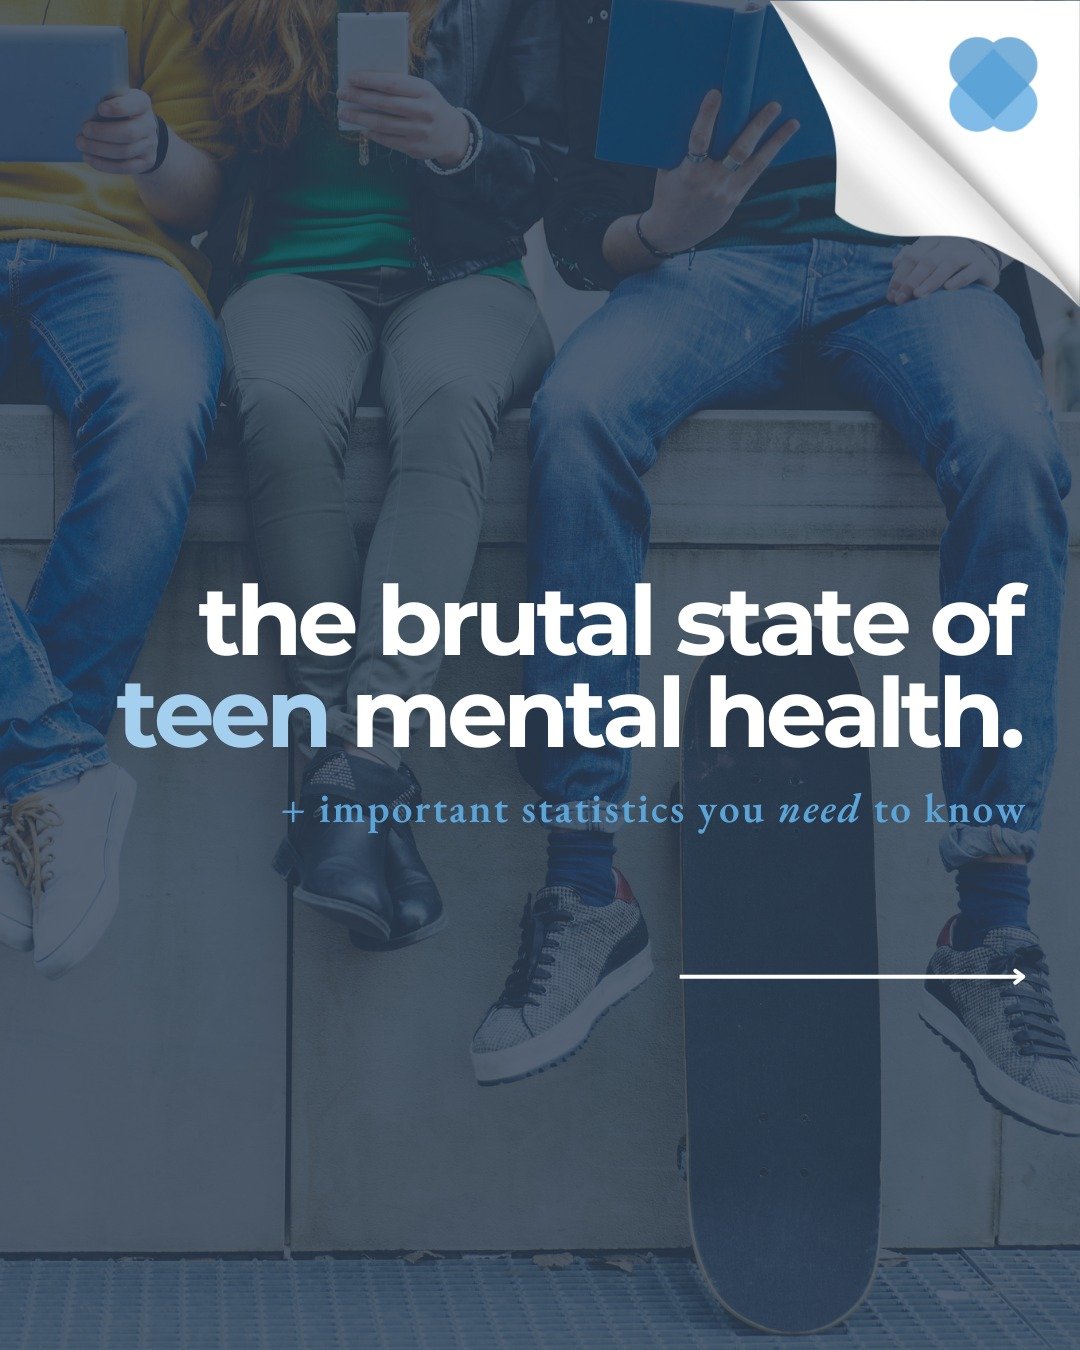 Facing the harsh reality of teen mental health crisis. 

Amidst the challenges, there's a glimmer of hope. Together, we can break the stigmas associated with mental health disorders and suicide by continuing to offering support to our youth and ignit